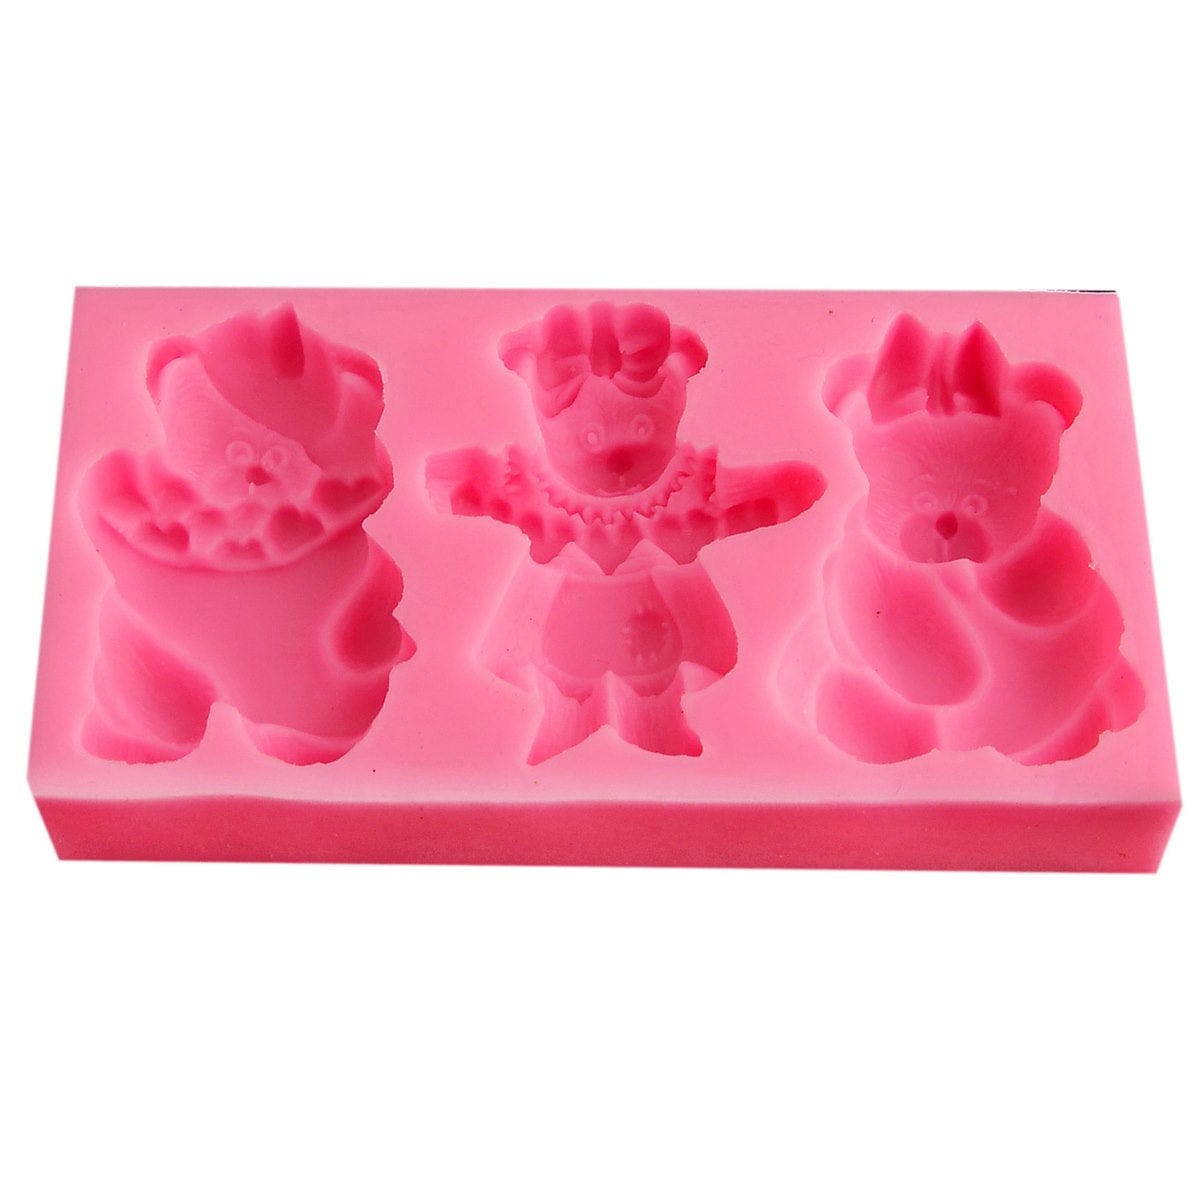 jags-mumbai Mould Silicone Mould Birthday Teddy JSF213, Silicone mould for resin, cakes, soaps and candles